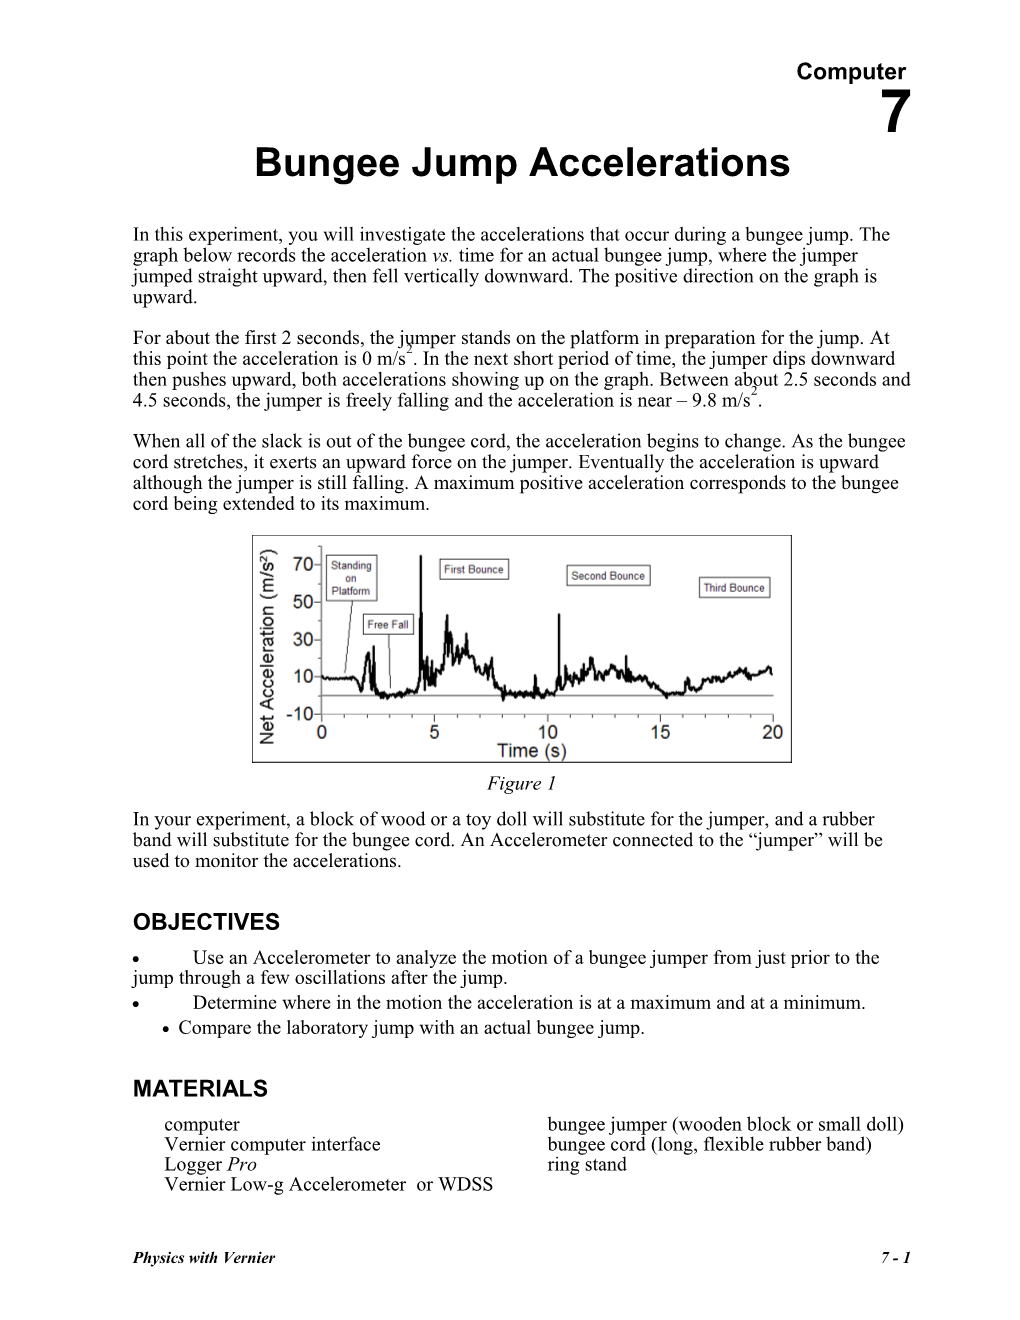 Bungee Jump Accelerations